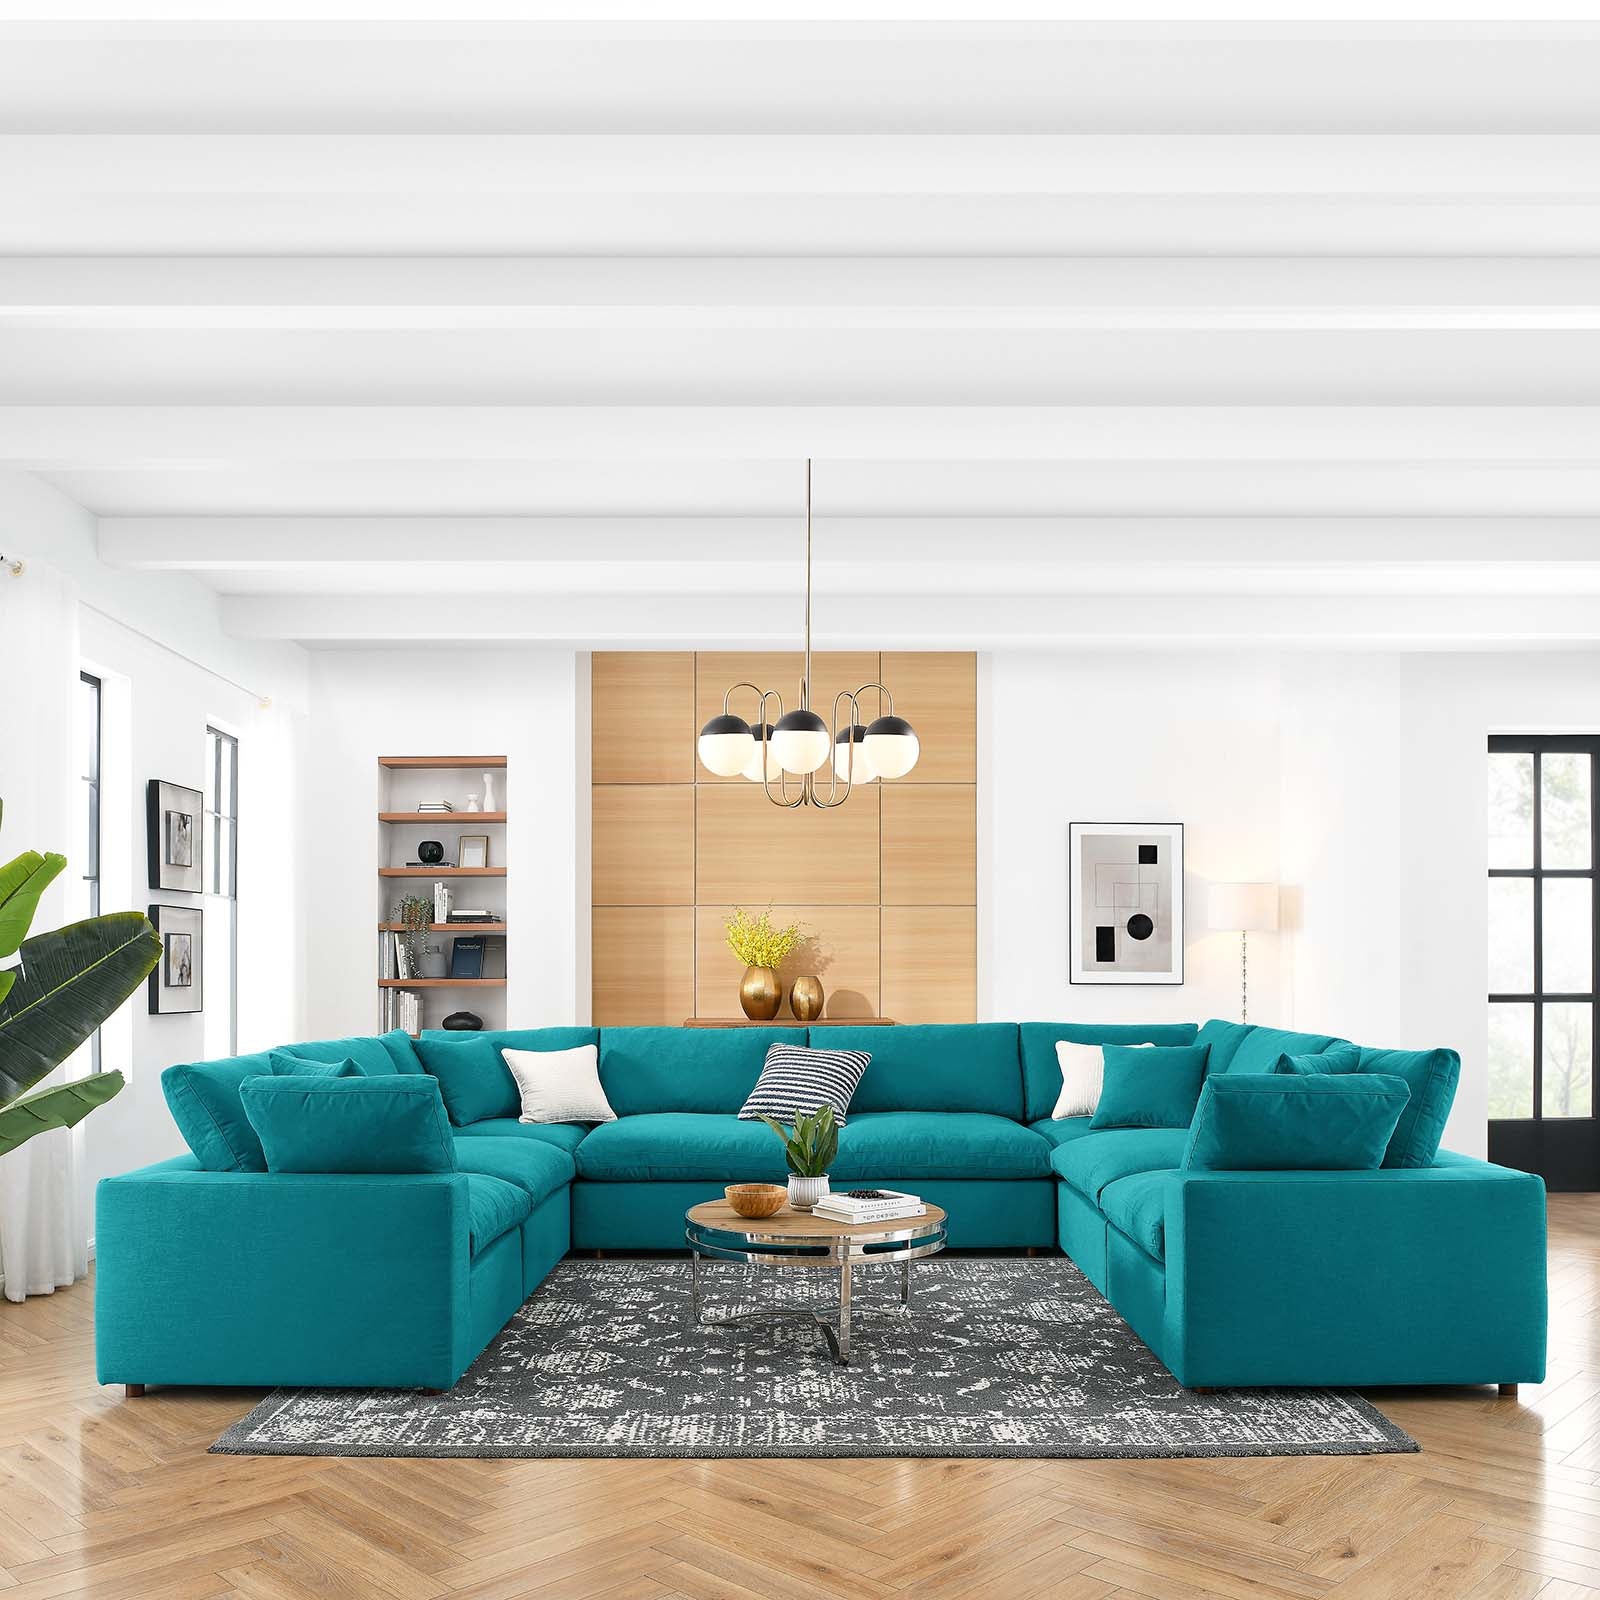 Modway Sectional Sofas - Commix Down Filled Overstuffed 8 Piece Sectional Sofa Set Teal